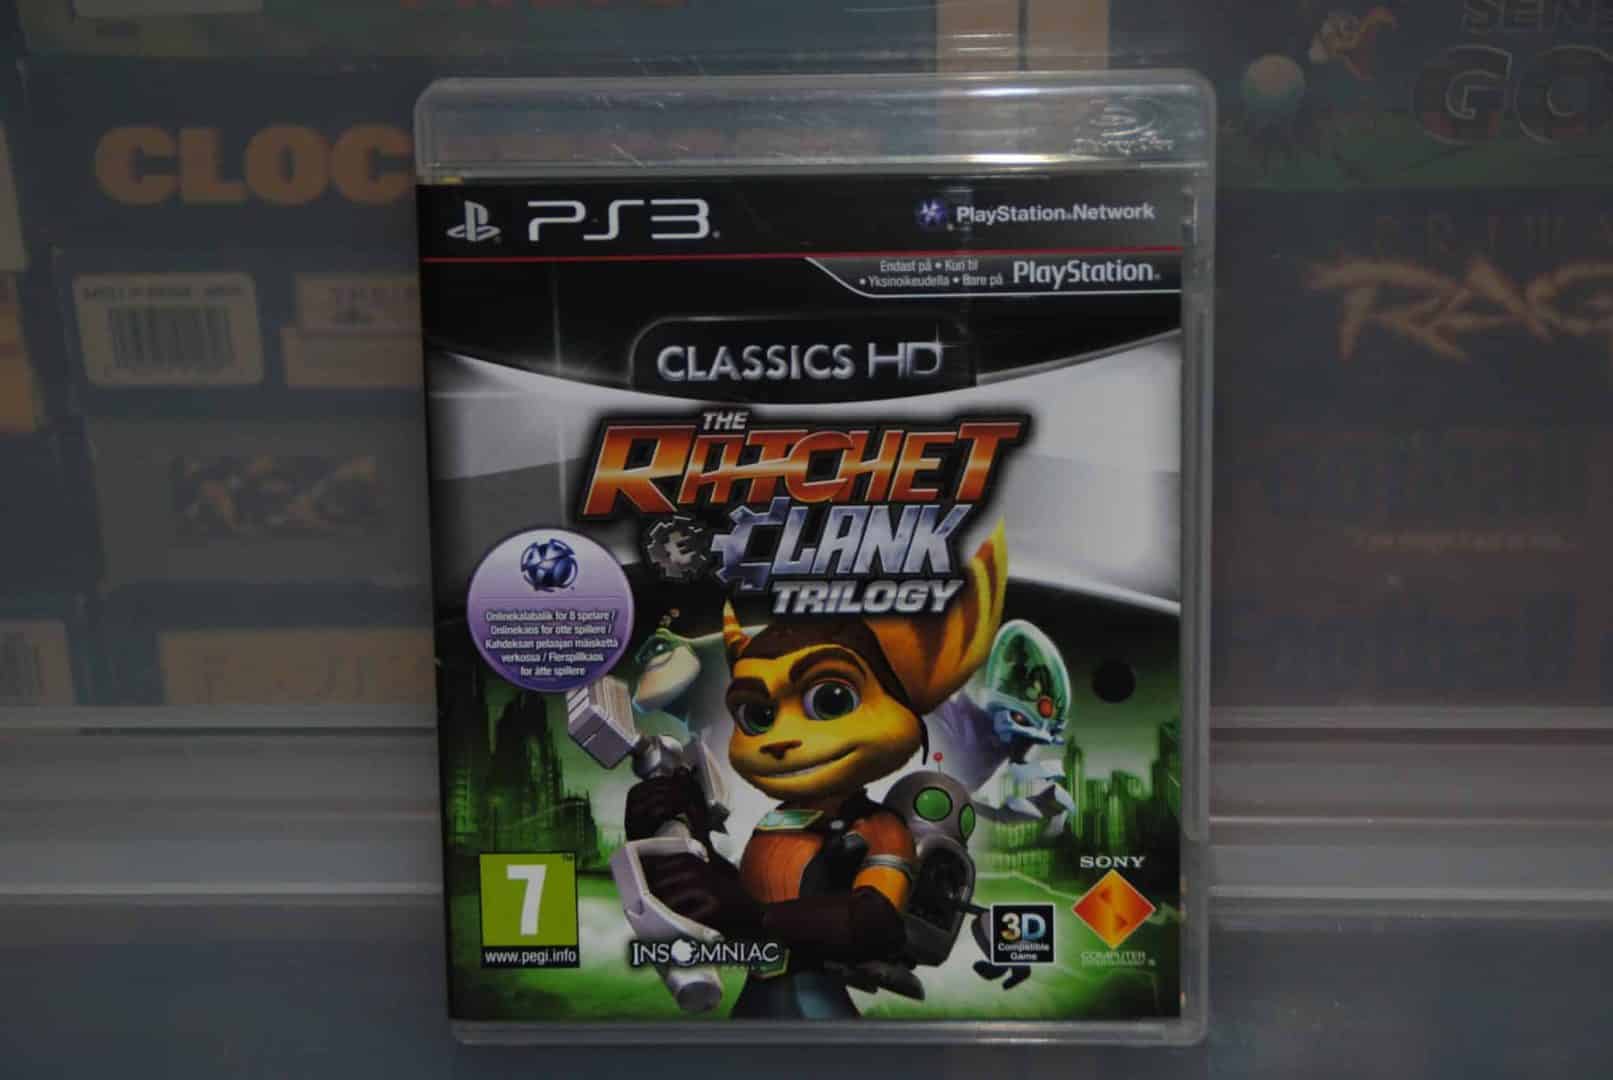 Ratchet & Clank Trilogy HD, PS2 games gone PS3.